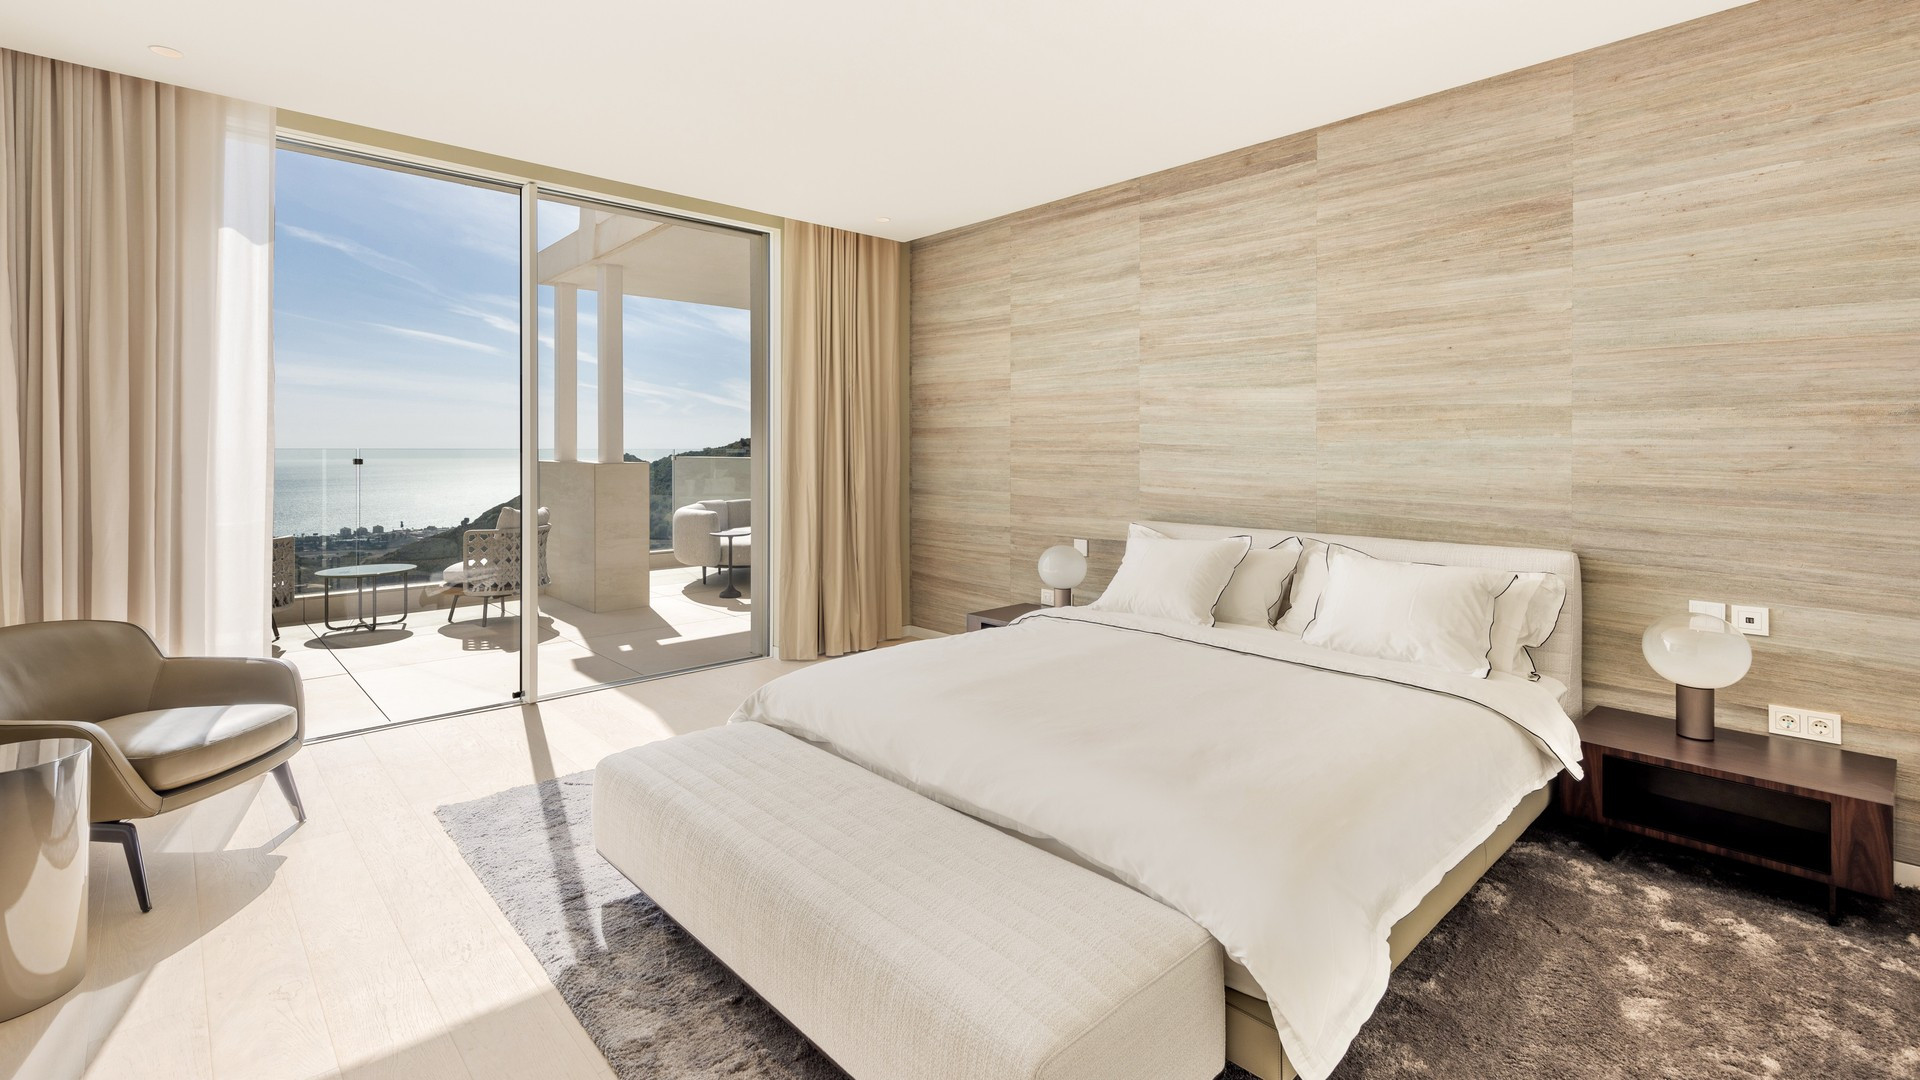 New spacious three bedroom flat with sea views located in Palo Alto, Ojén. | Image 6